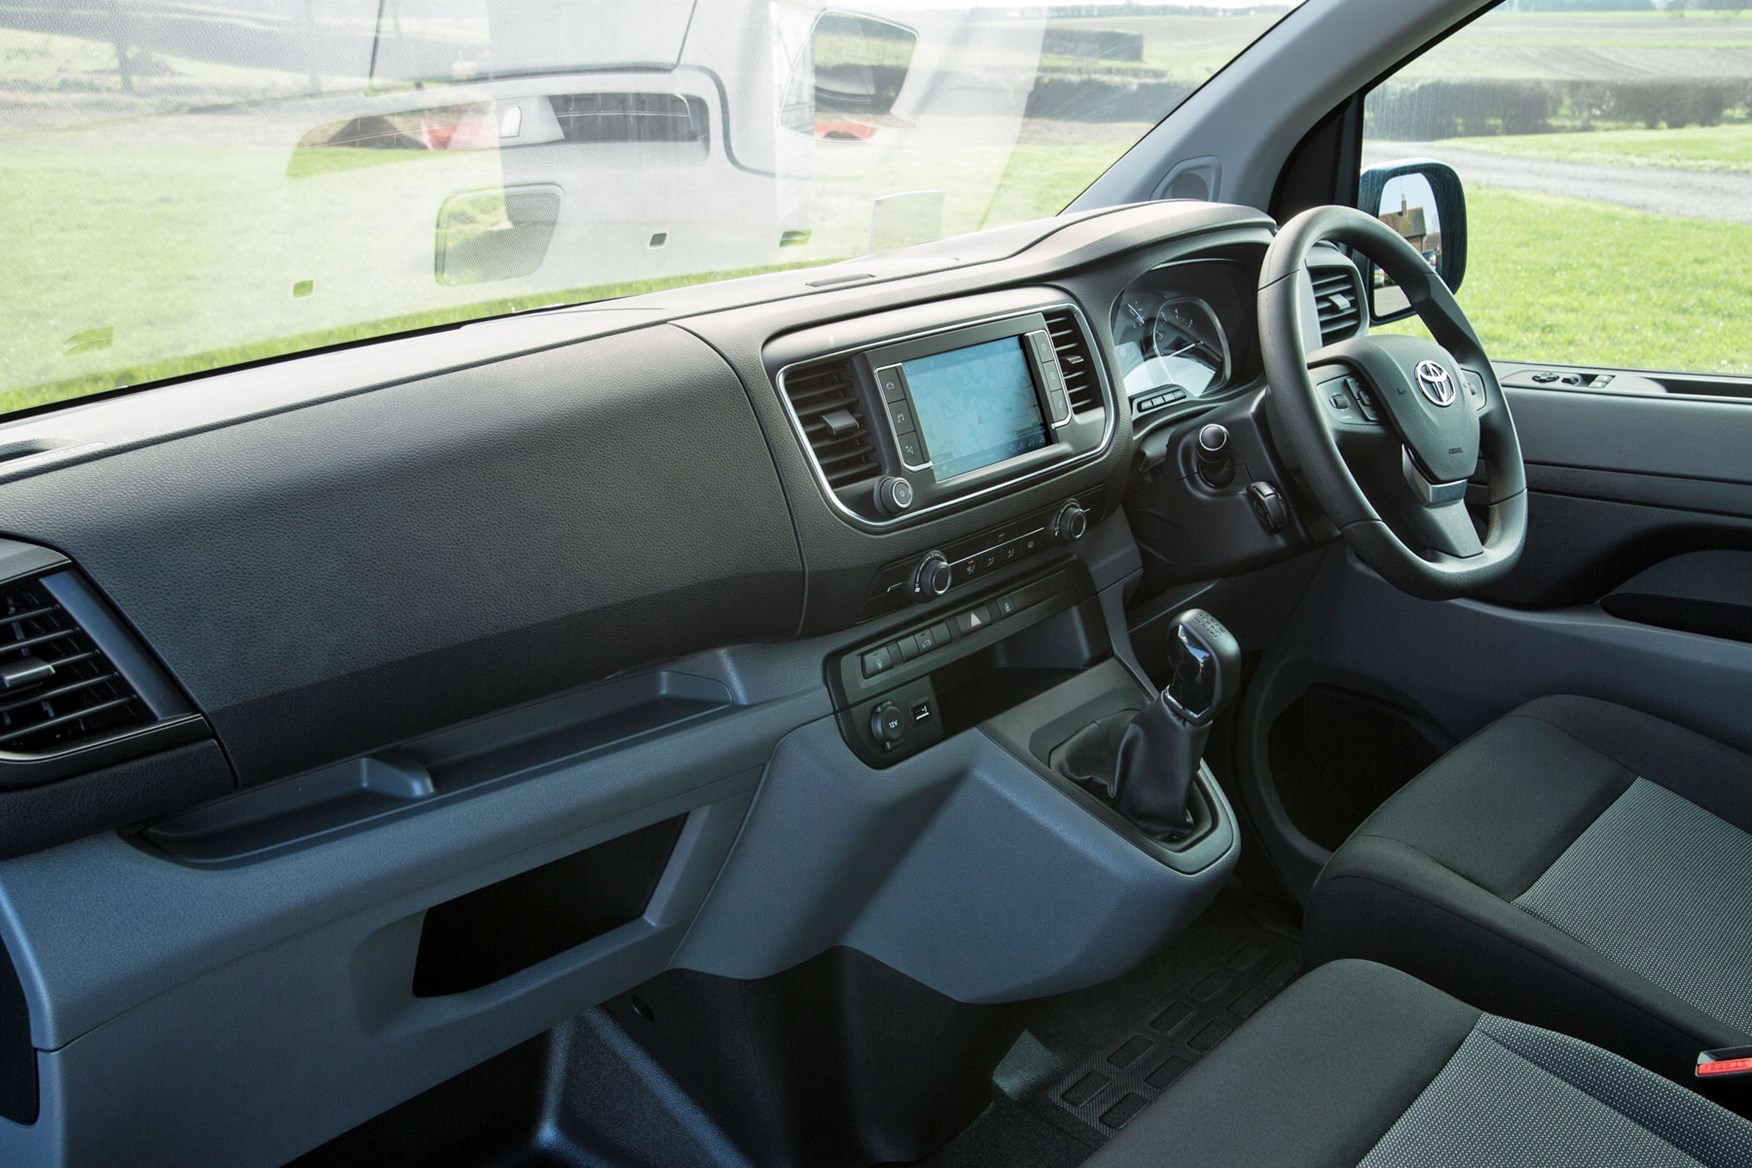 Toyota Proace review - cab interior showing whole dashboard from passenger side, 2018